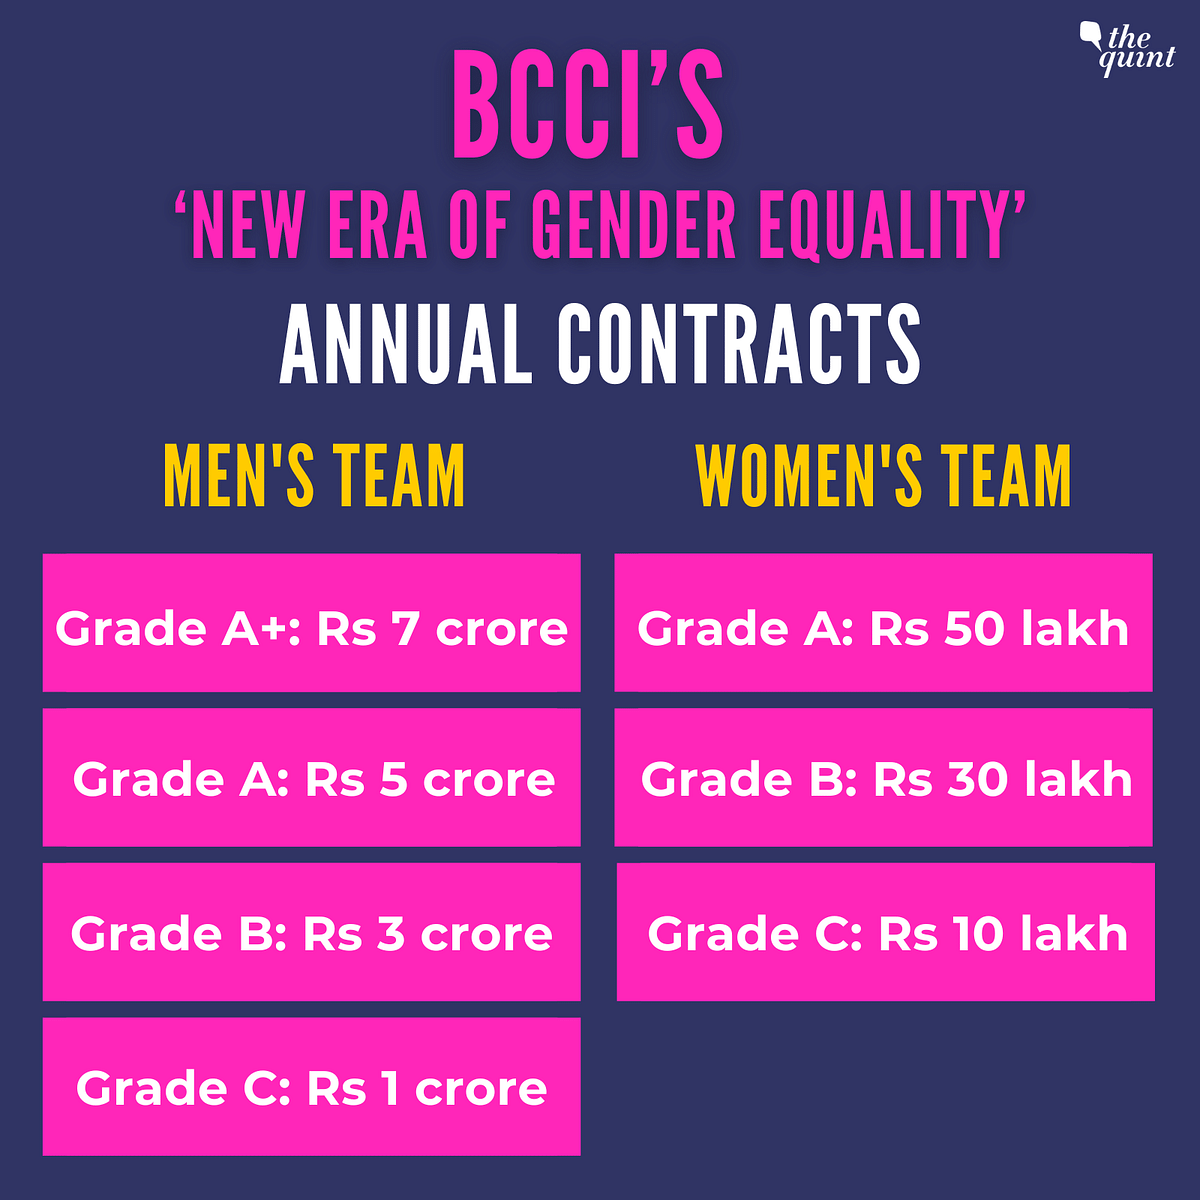 BCCI's revised fee structure will now see both men and women cricketers receive the same amount as match fee.